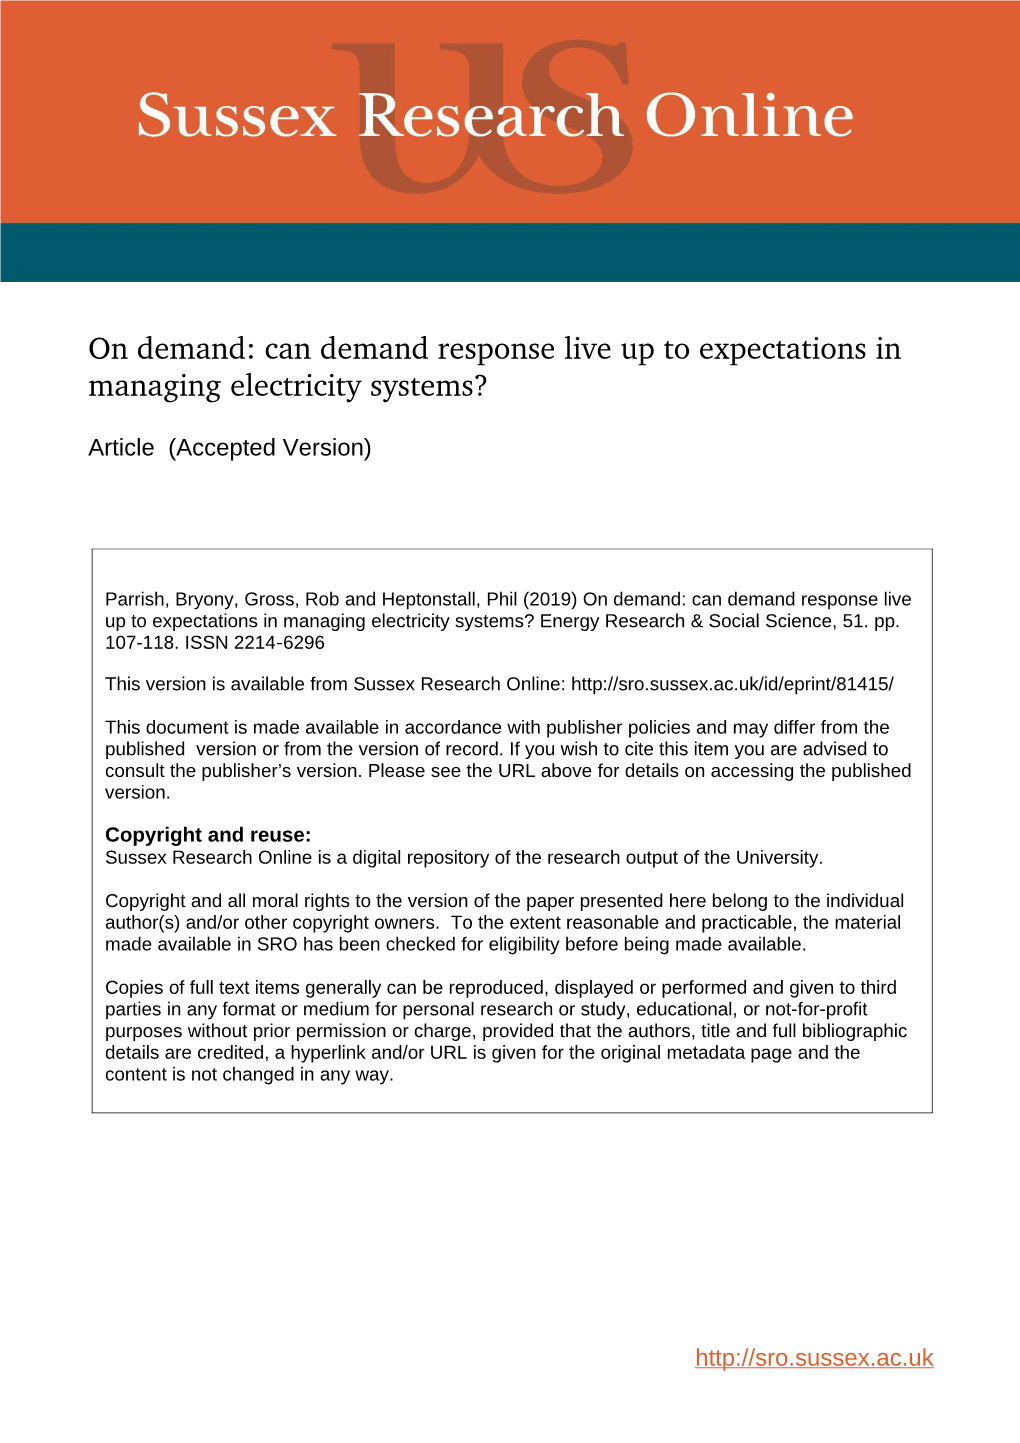 Can Demand Response Live up to Expectations in Managing Electricity Systems?